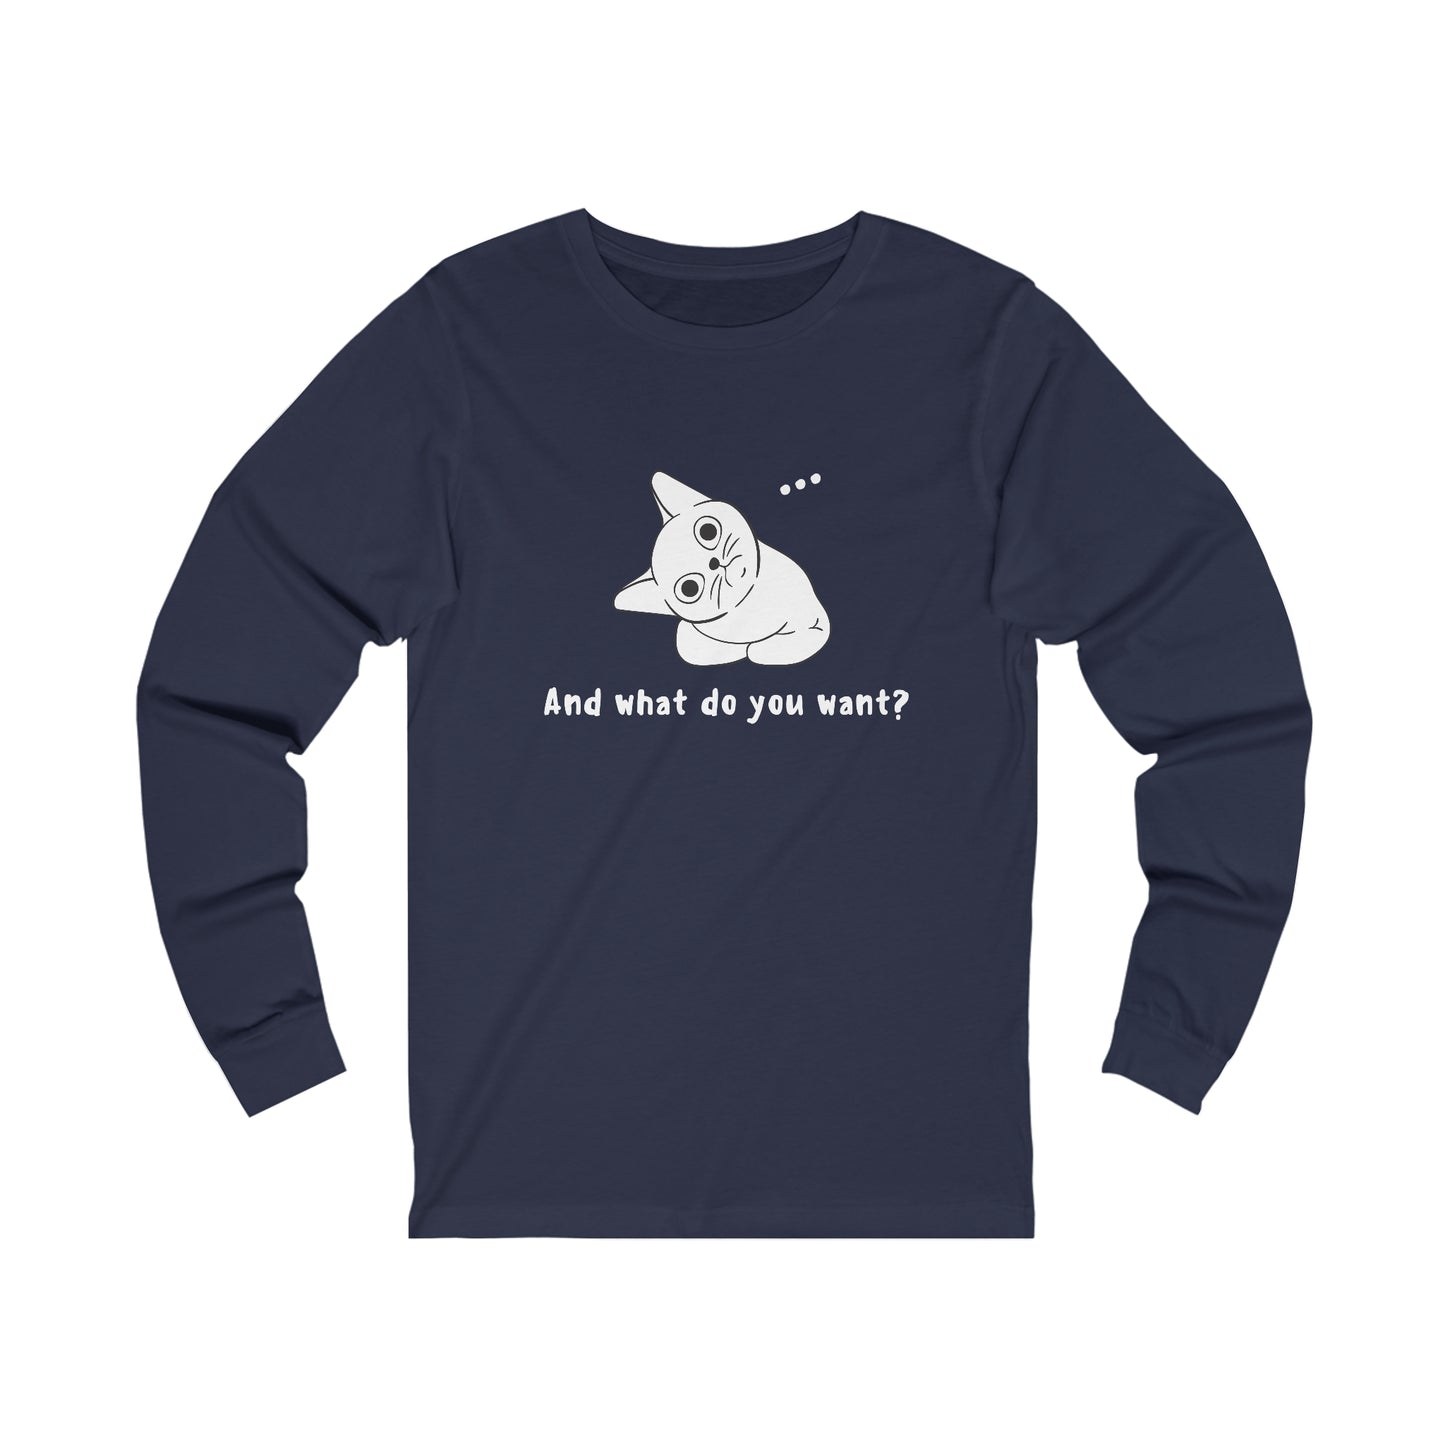 Vexing Cat Wondering What You Want. Unisex Jersey Long Sleeve Tee